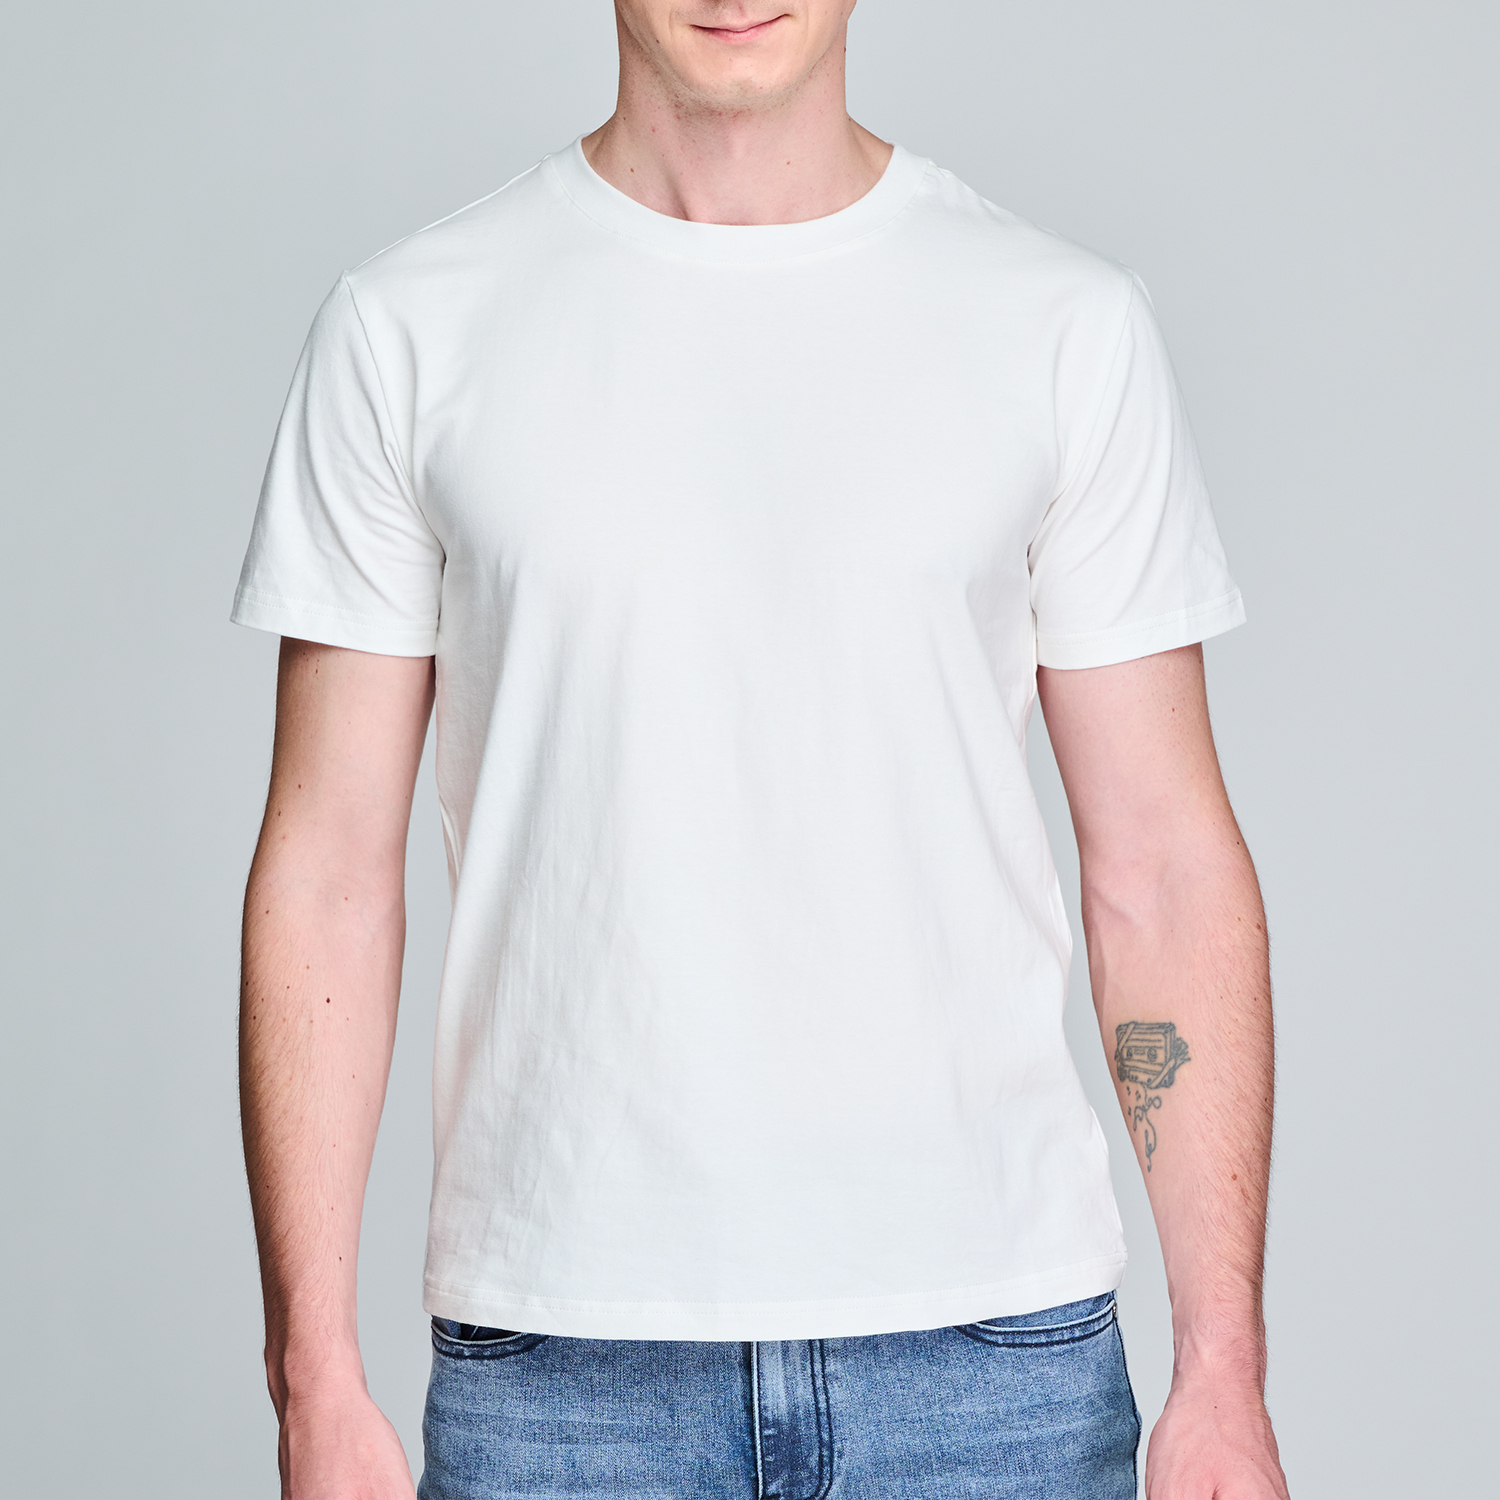 Unisex Classic Crew Neck Cotton T-Shirt for Retail Stores - Print On Demand | HugePOD-6